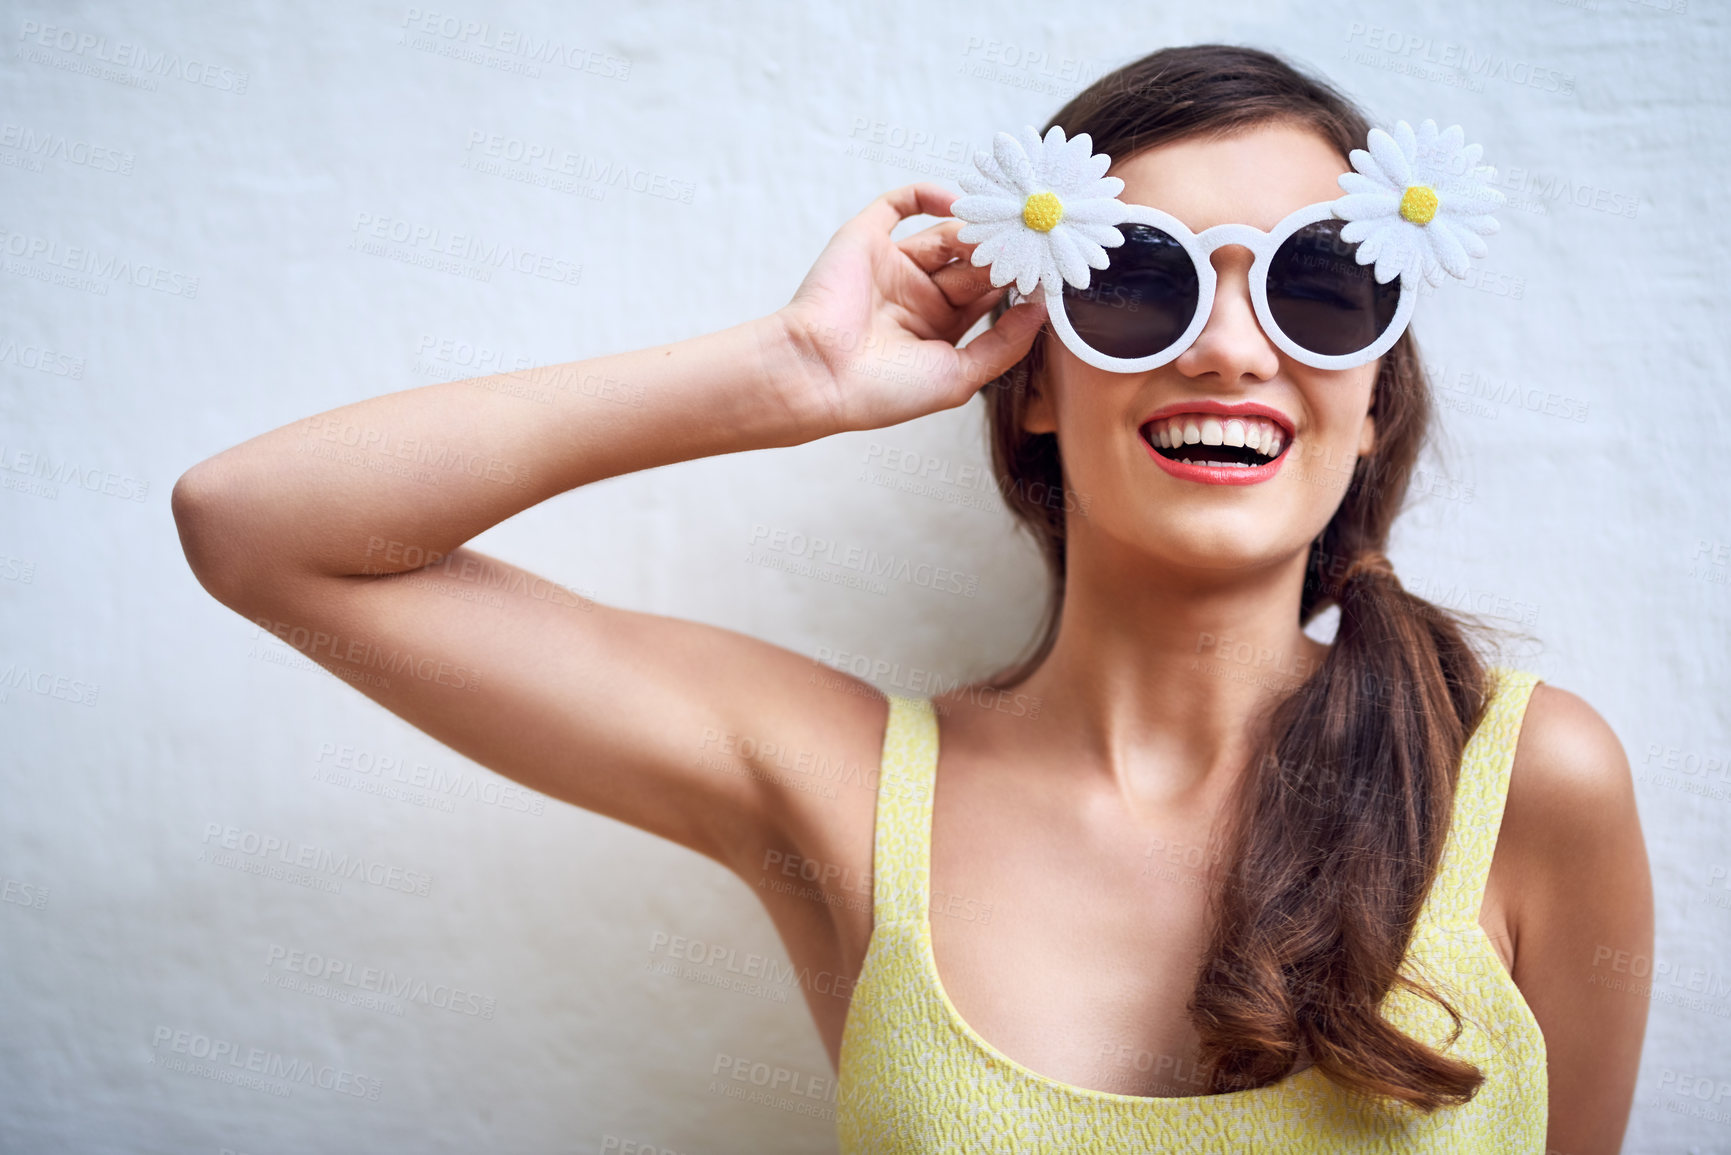 Buy stock photo Studio portrait of a cheerful young woman wearing sunglasses while posing against a grey background